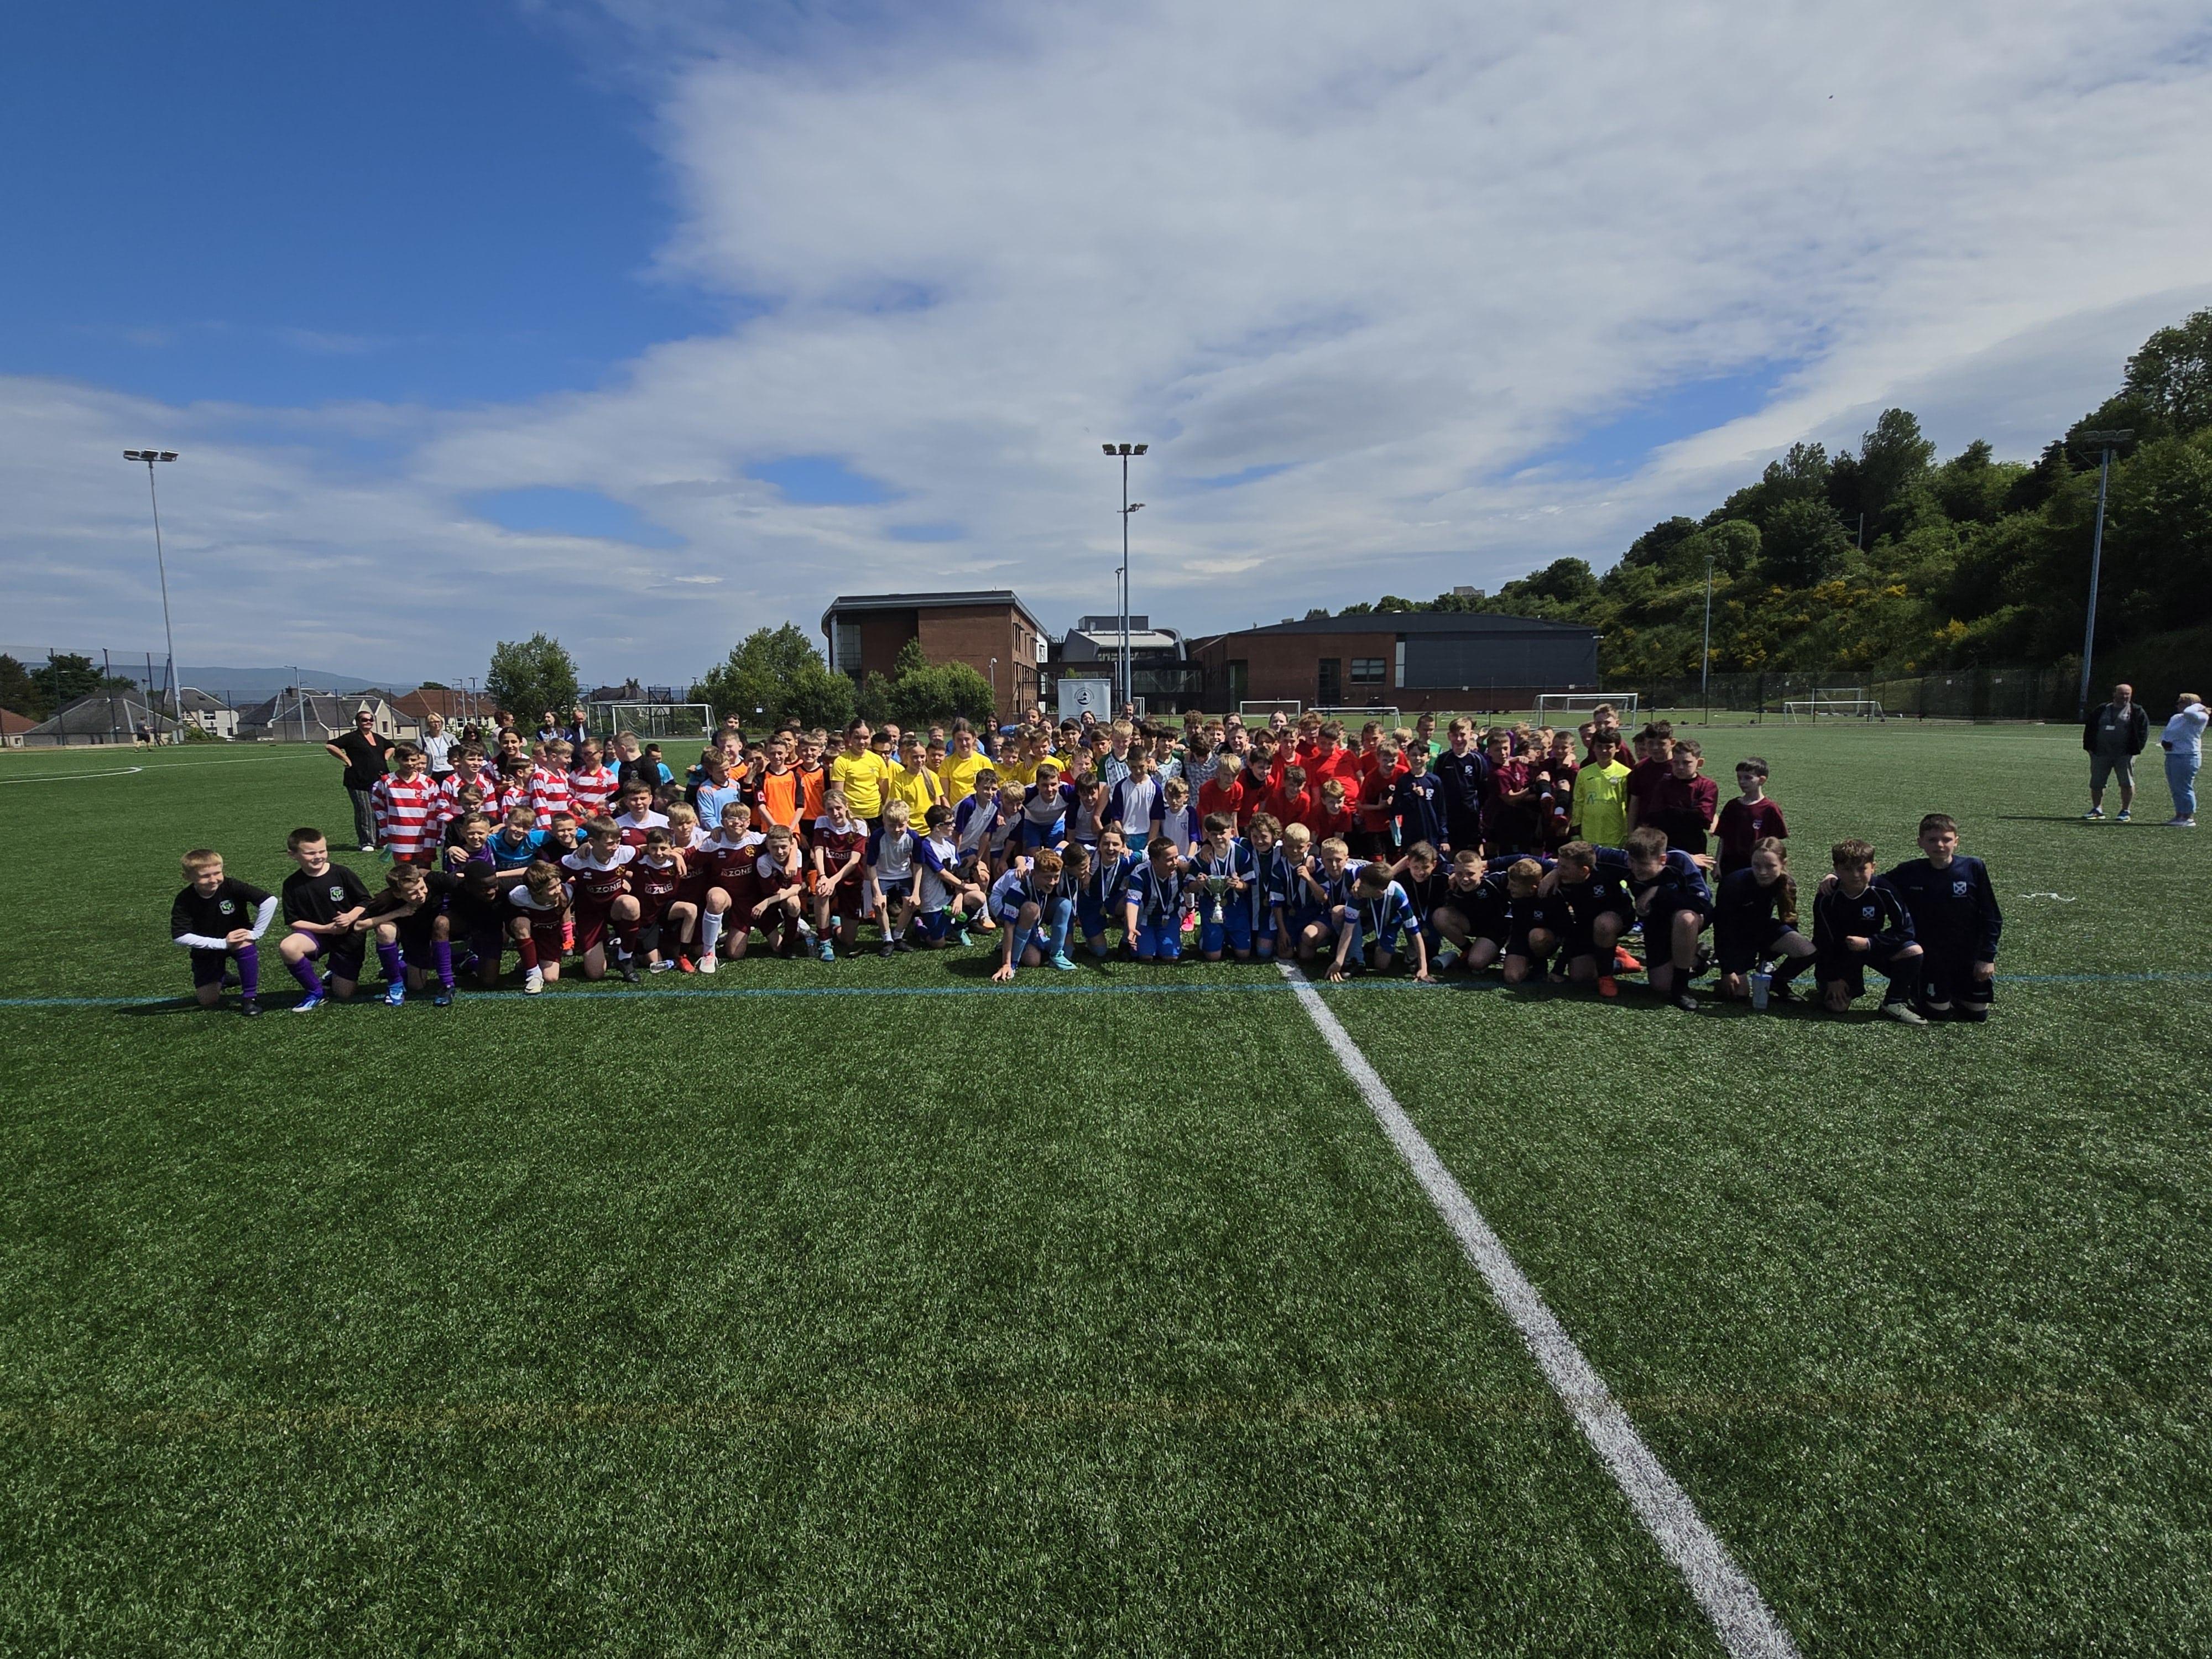 Primary schools who participated in the Cloch Cup